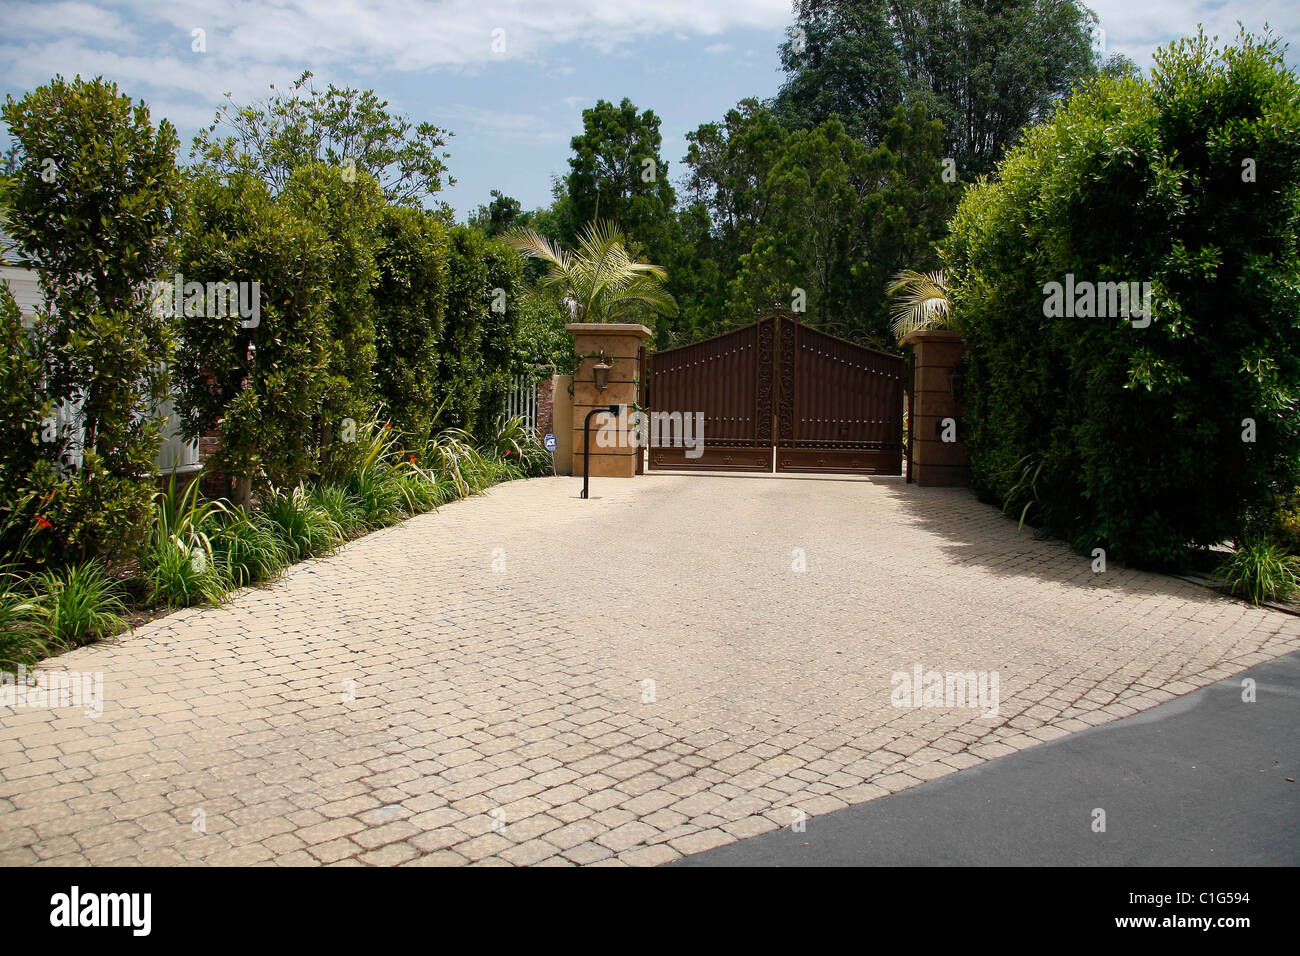 The Toluca Lake home of Miley Cyrus Los Angeles, California - 23.05.09  Stock Photo - Alamy